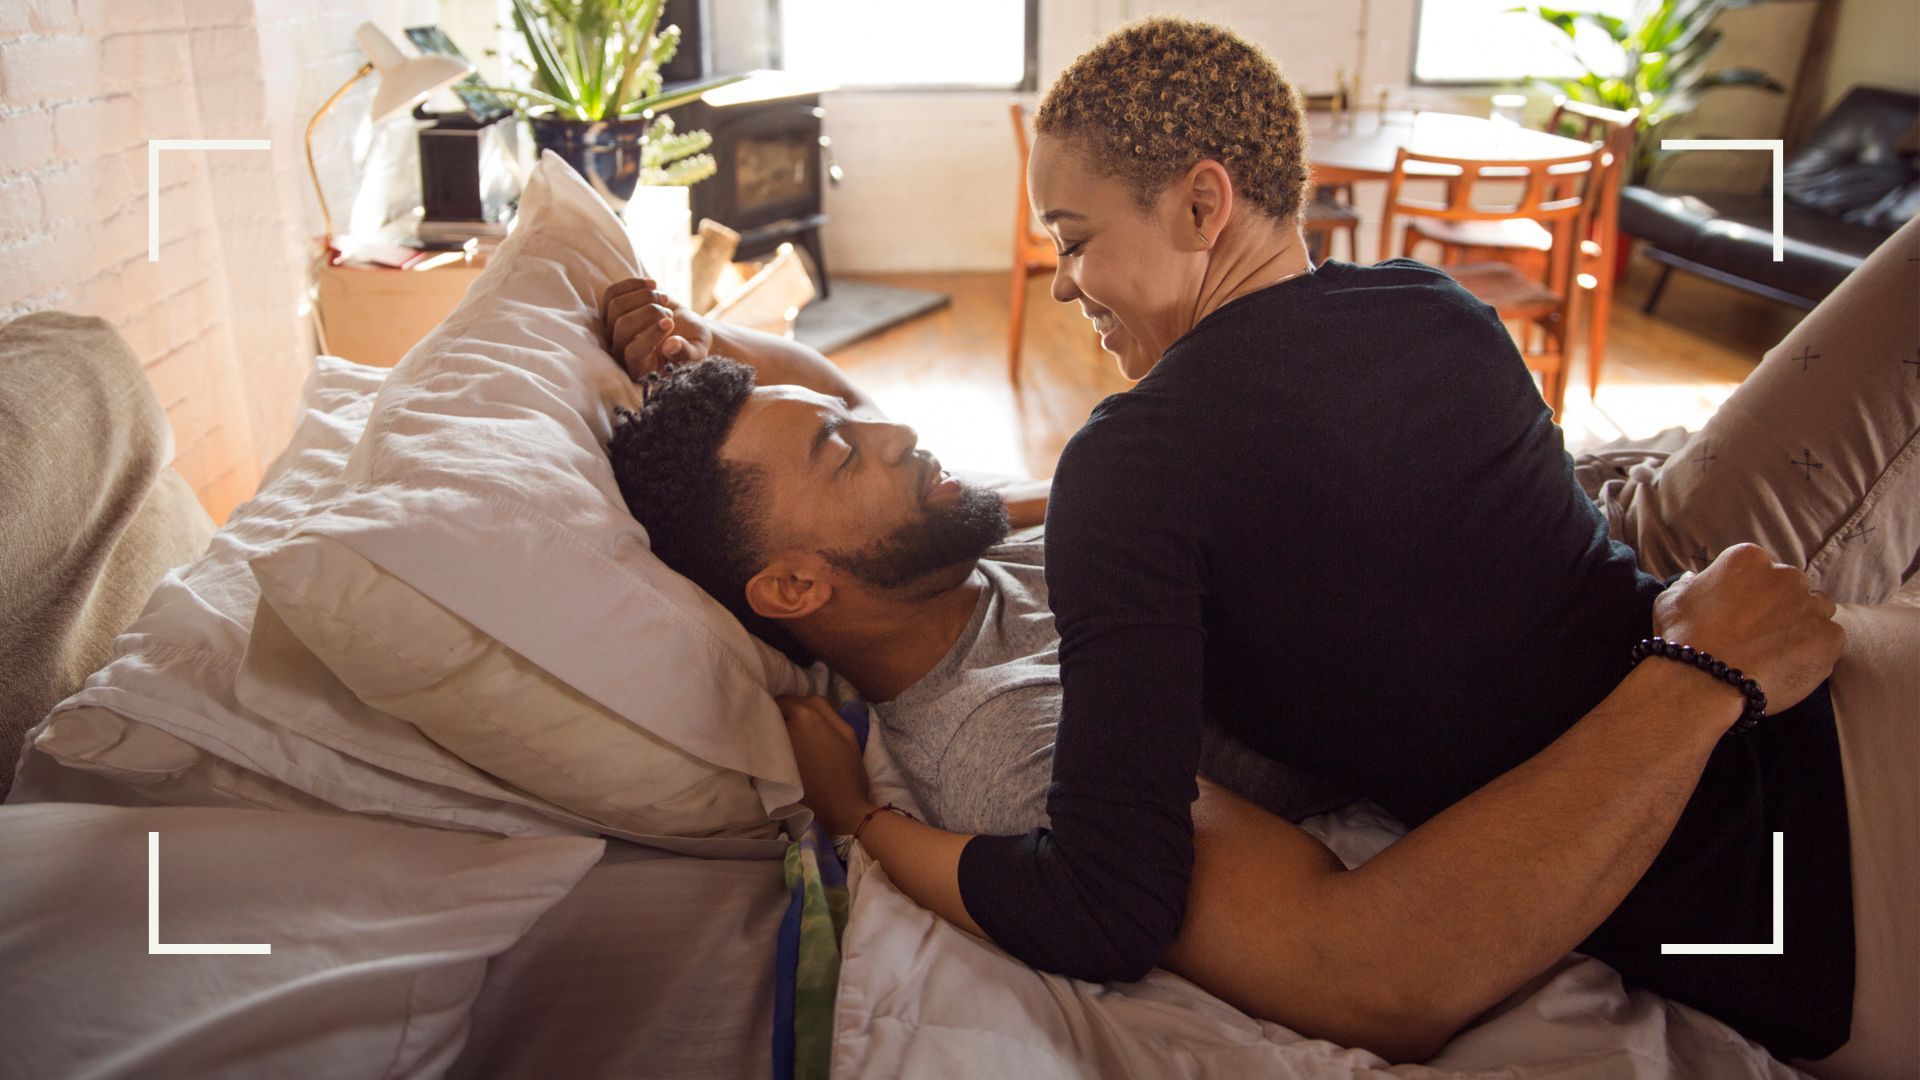 Couple lying in bed, laughing and smiling, about to try the full nelson sex position.